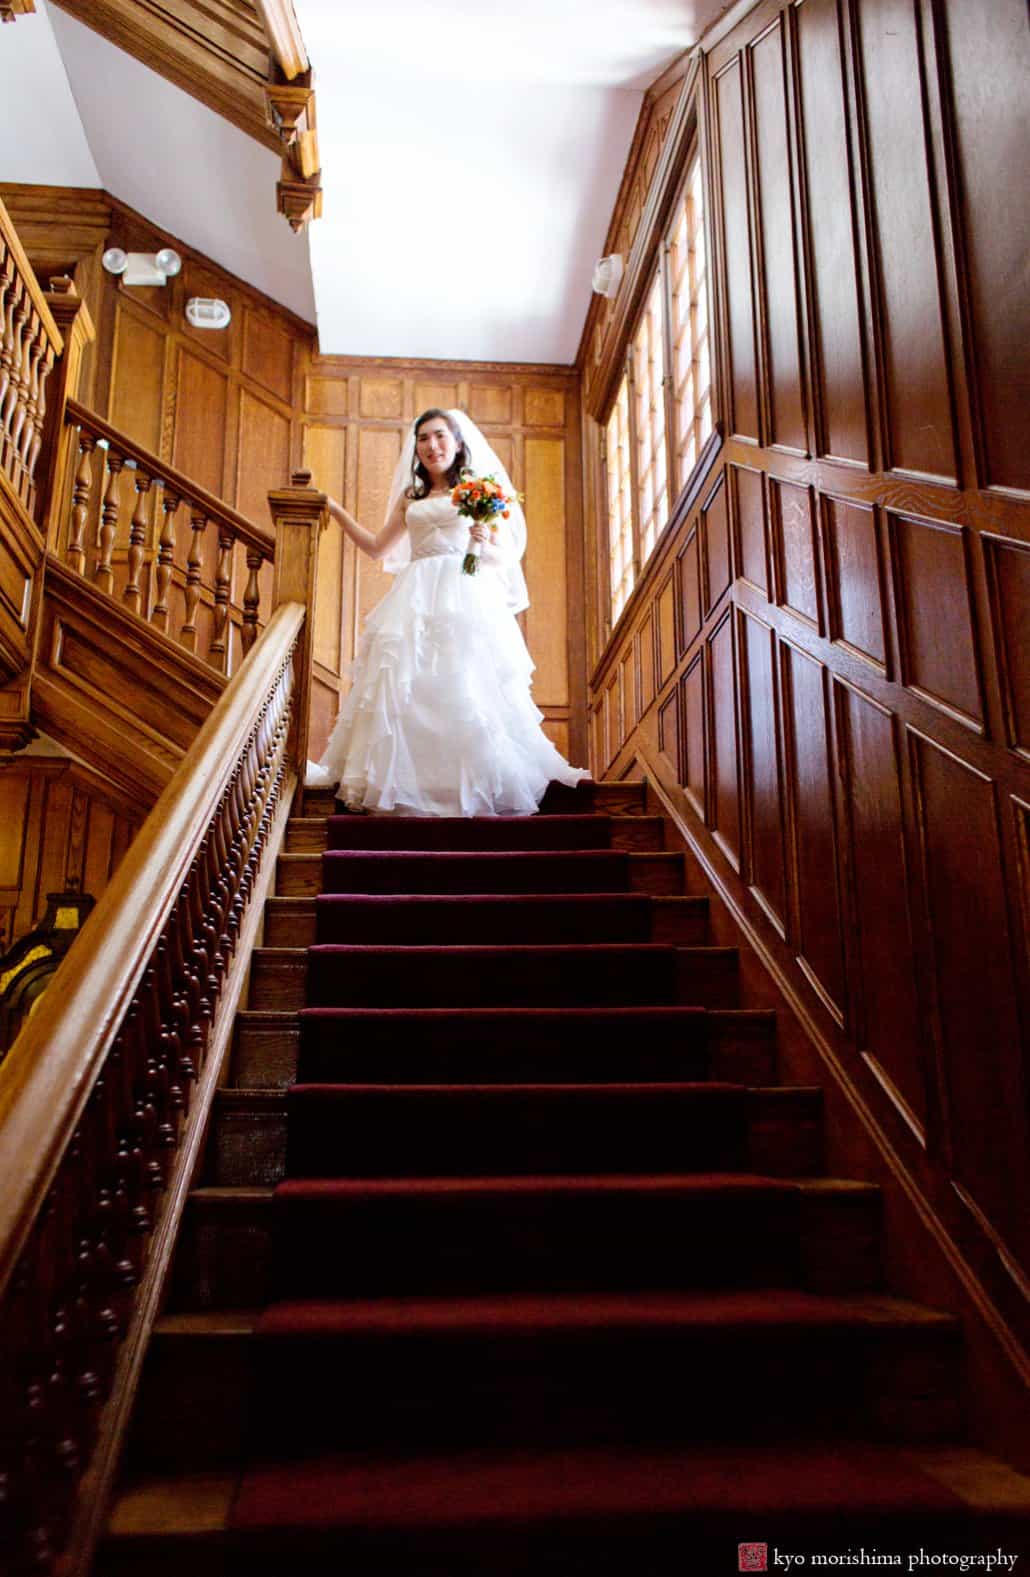 Bride descends the staircase before Princeton Cap and Gown Club wedding begins, photographed by Kyo Morishima